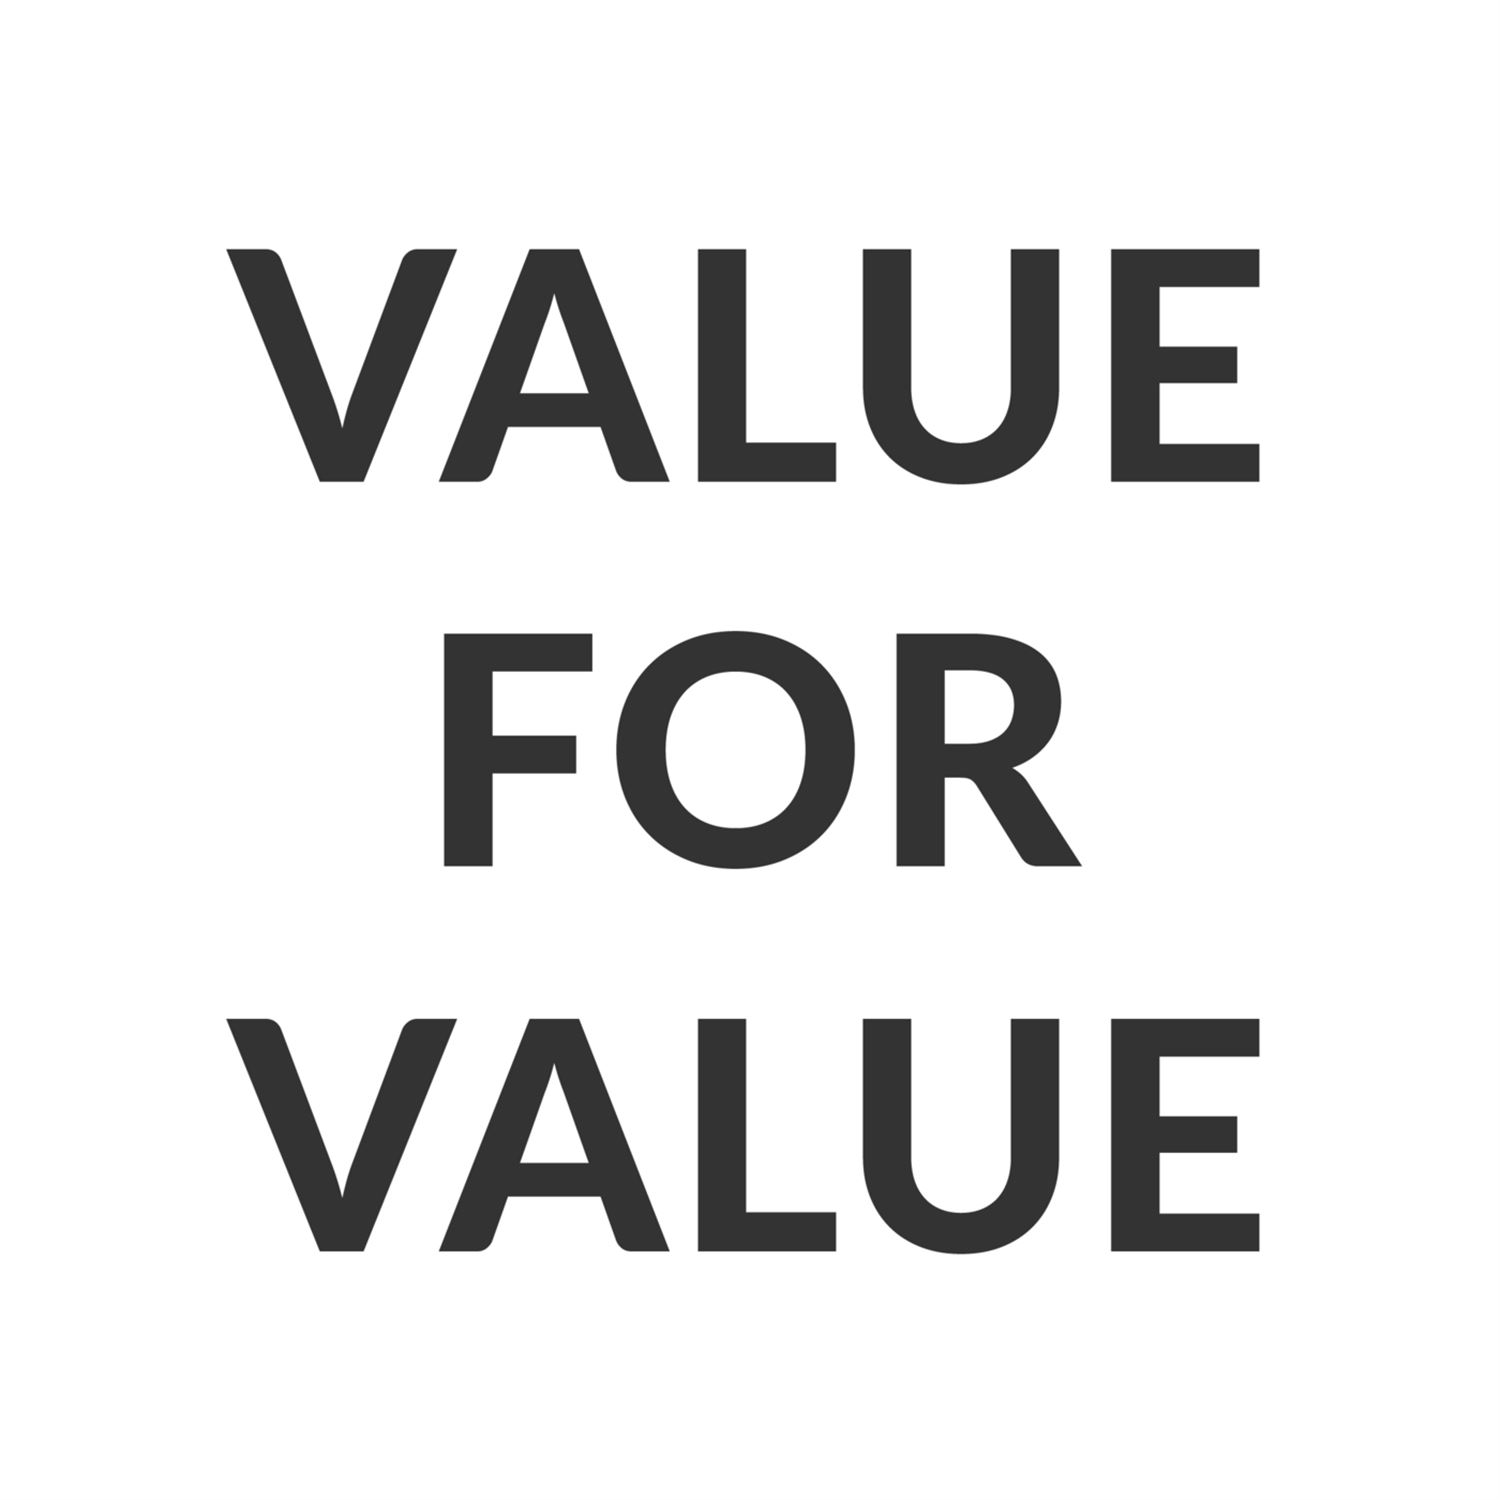 Value for value haters